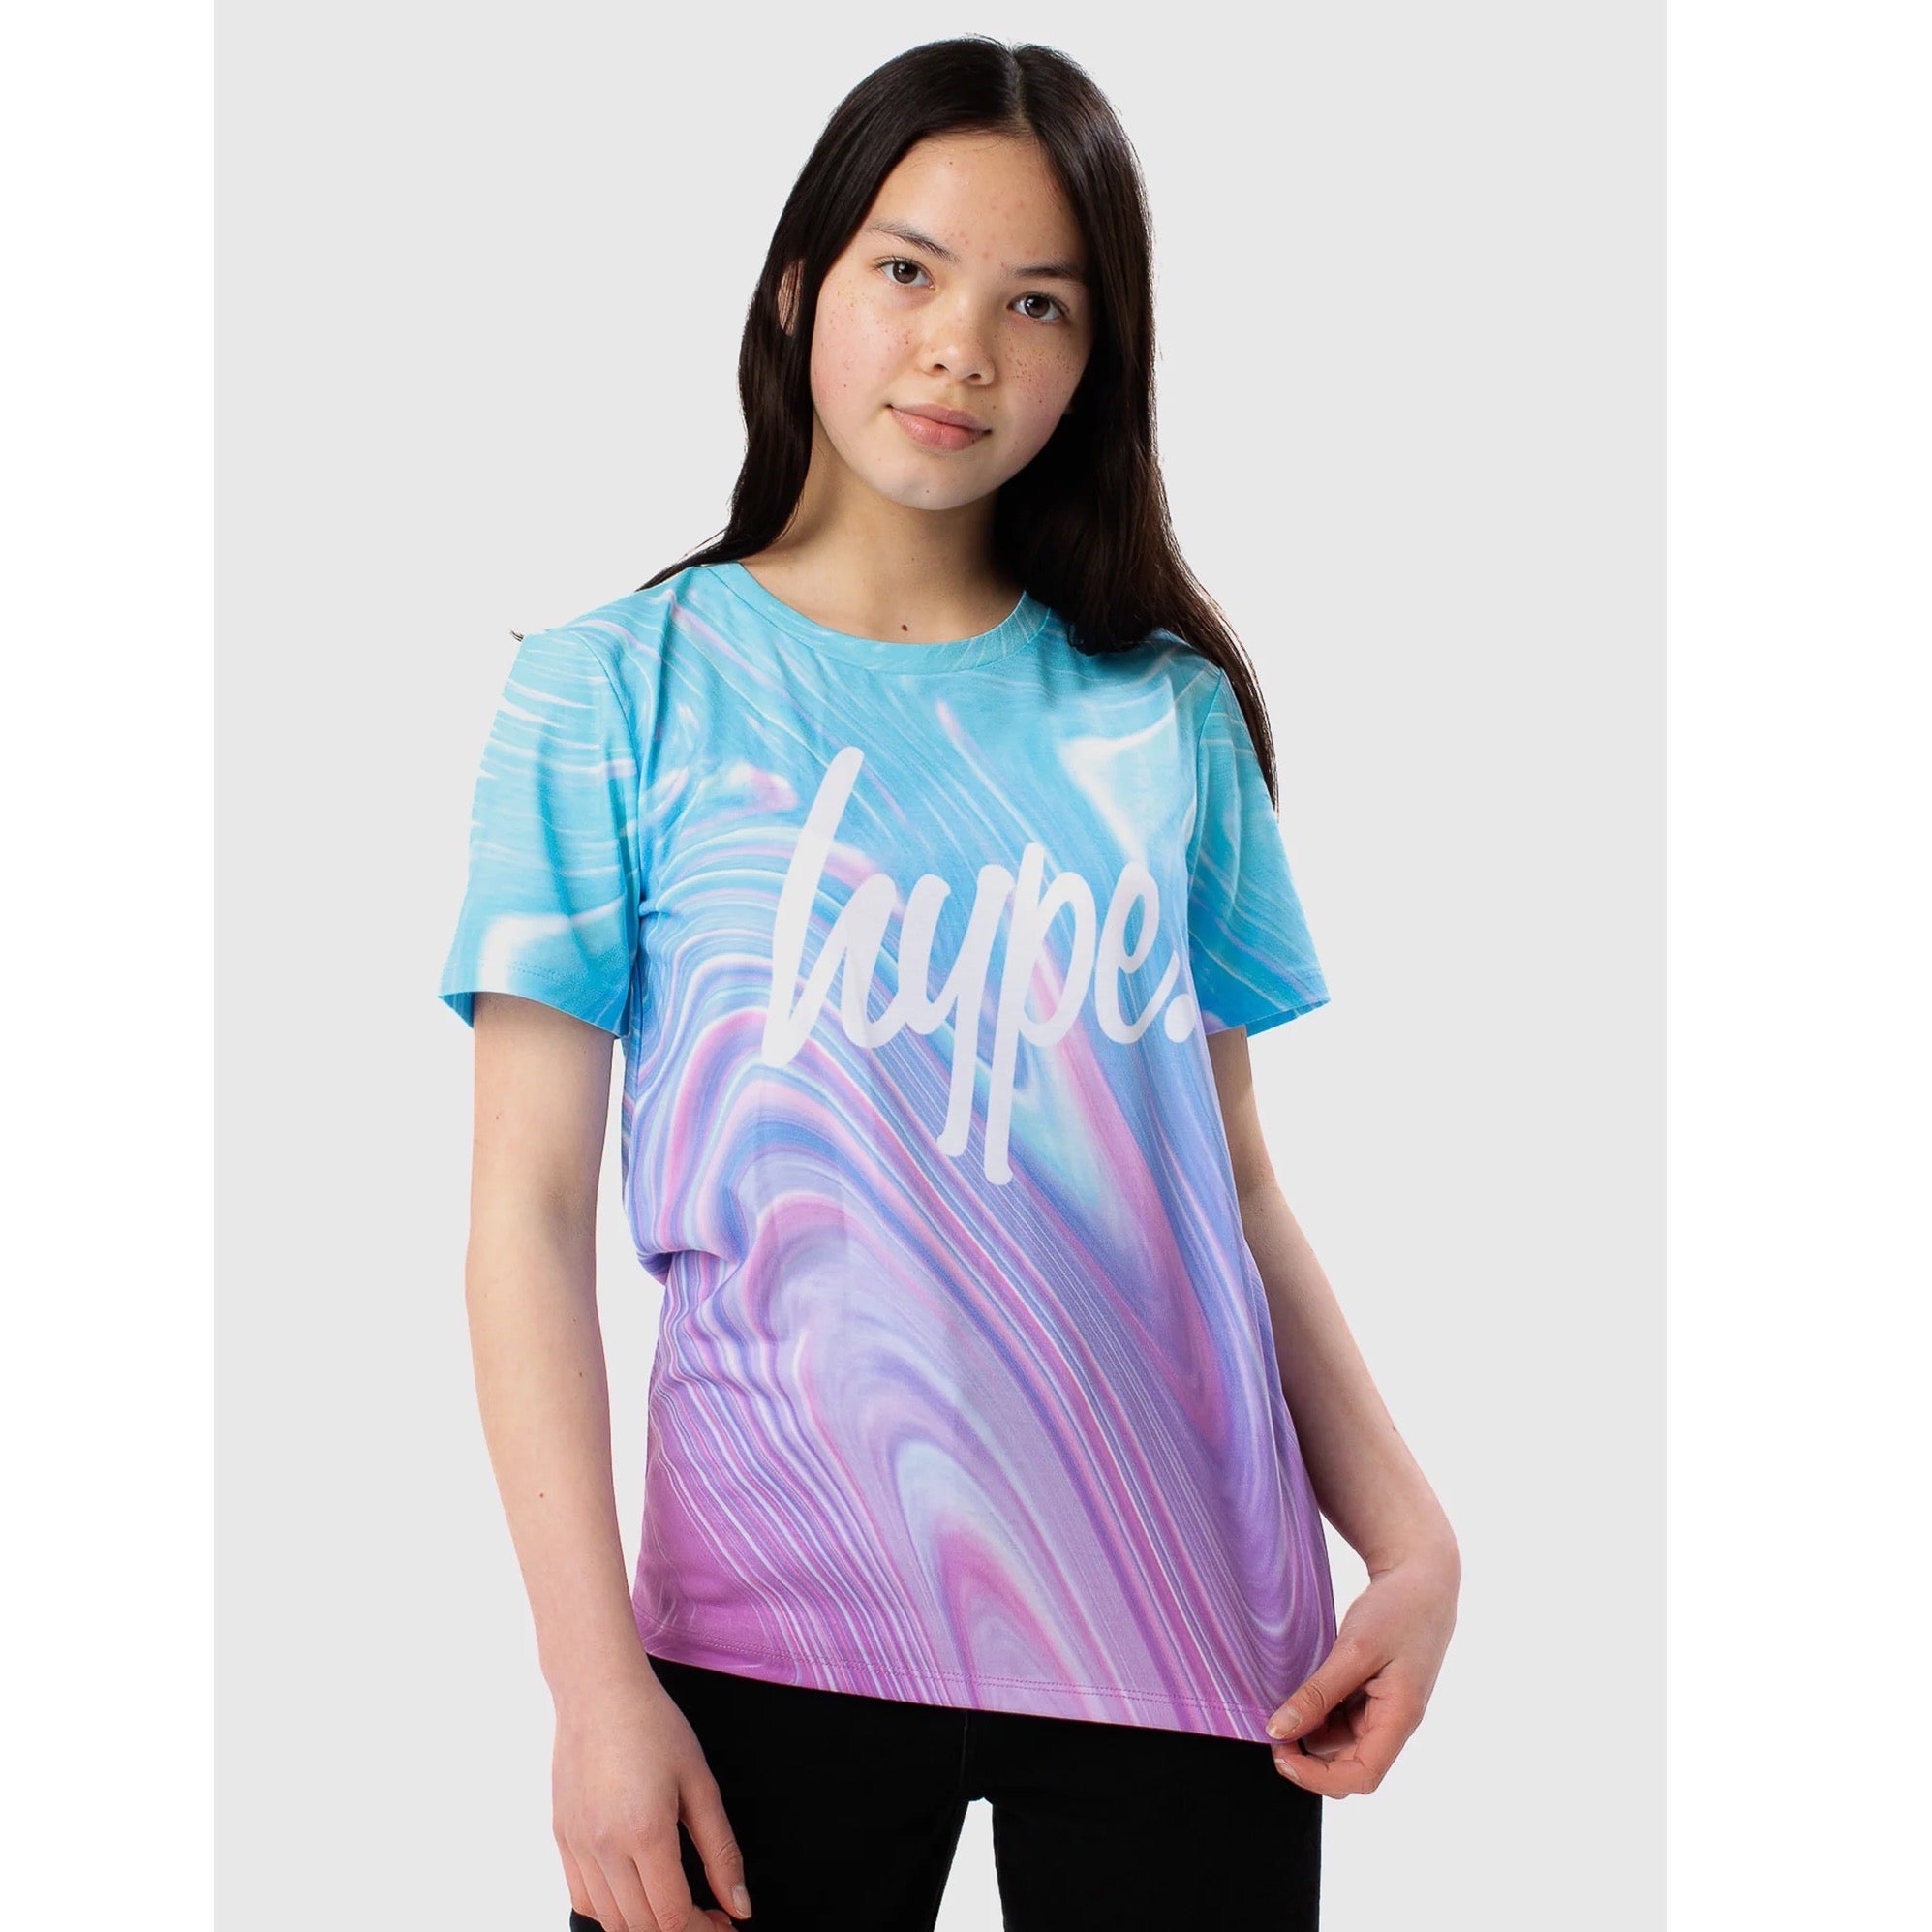 Hype Teal Purple Marble T-Shirt Zumh-516 Clothing 9/10YRS / Multi,11/12YRS / Multi,13YRS / Multi,14YRS / Multi,15YRS / Multi